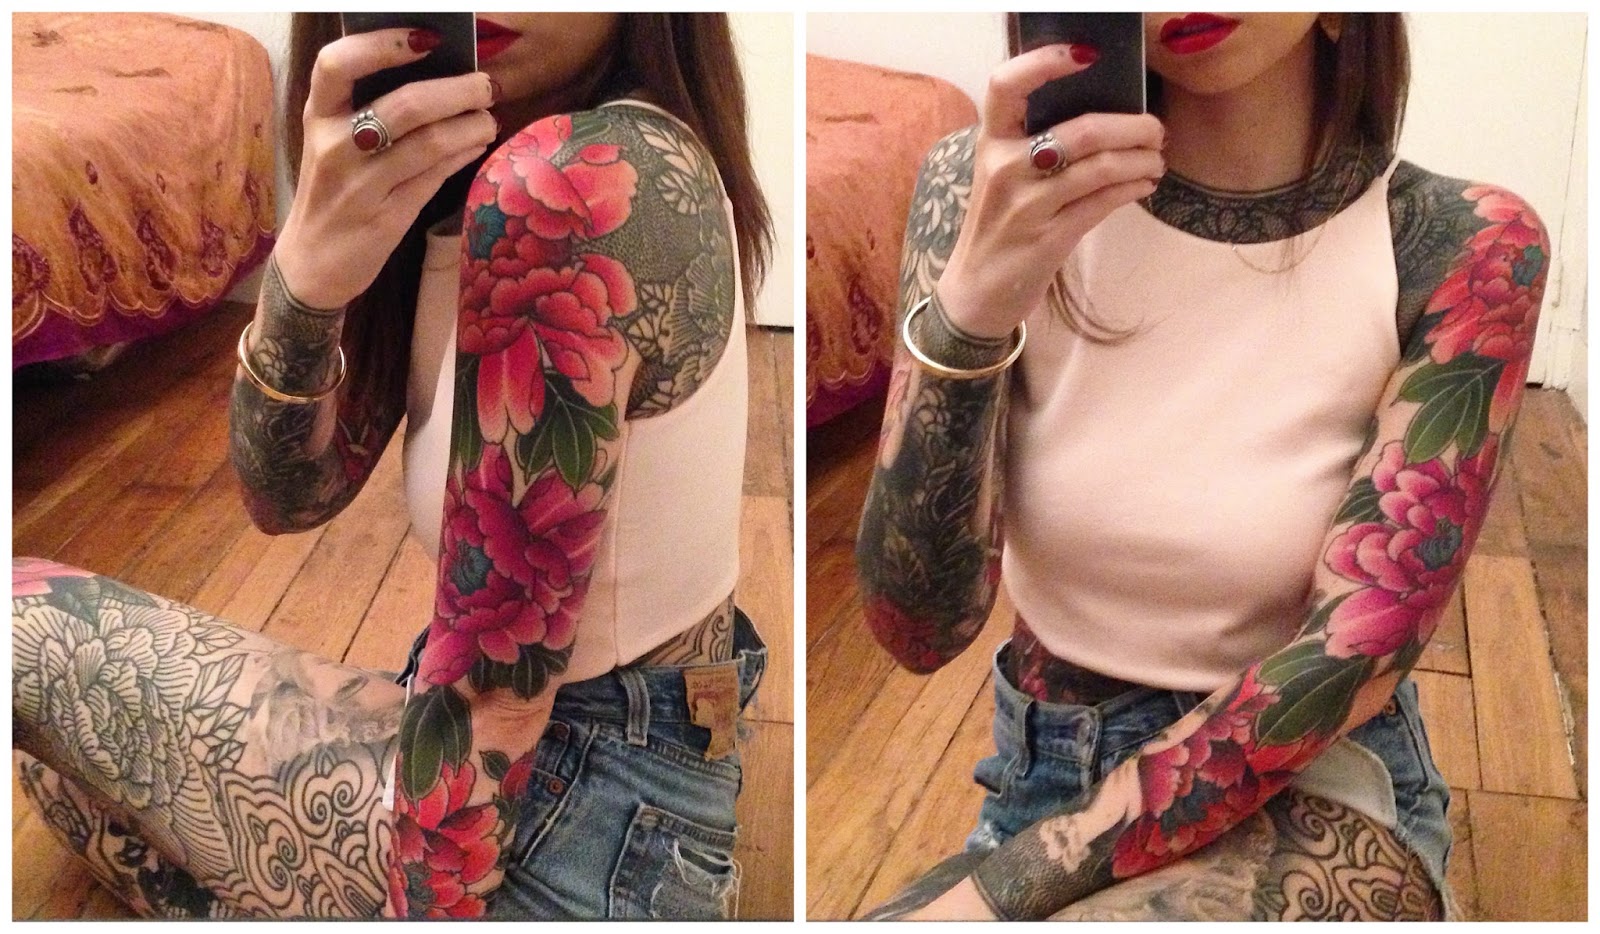 An Inkling | Interview with Céline @inspiredtattooportraits - SCARLET STATE  BLOG